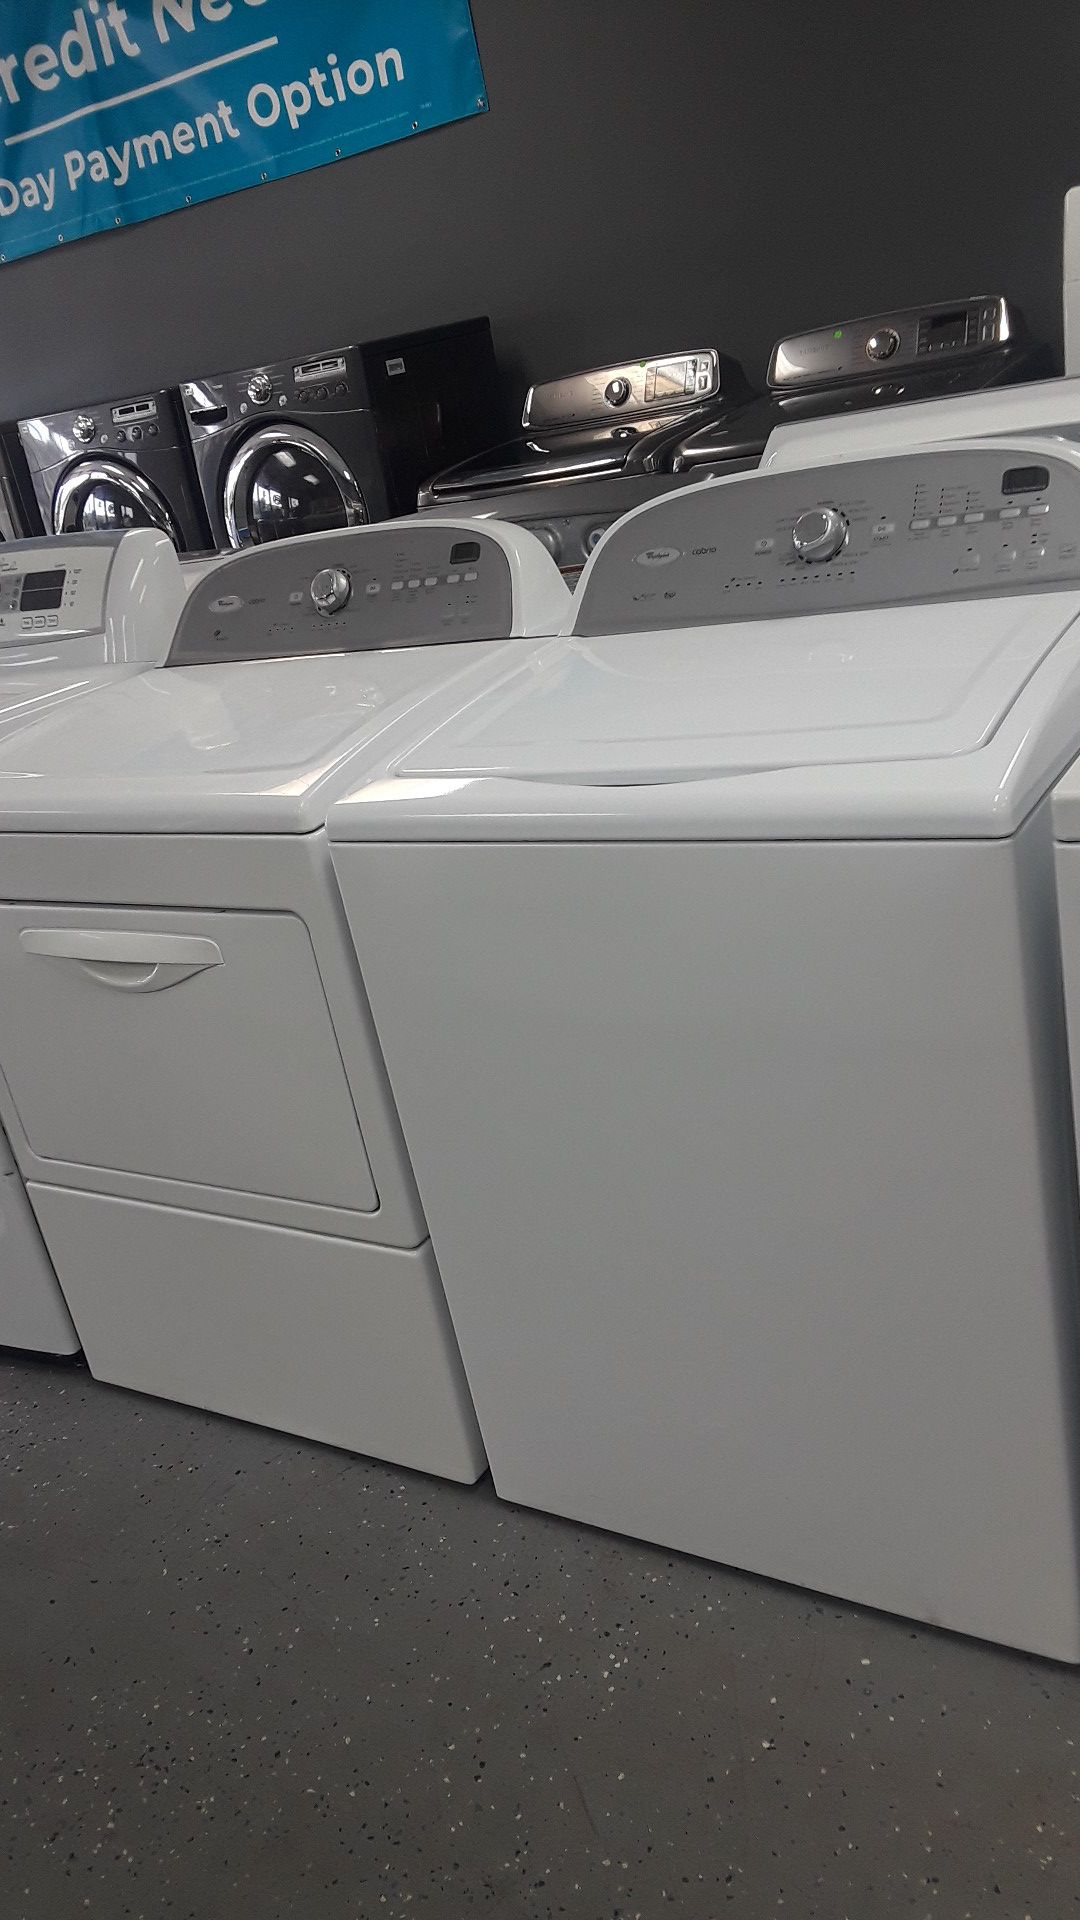 WHIRLPOOL CABRIO WASHER & DRYER SET H2 LOW WASH SYSTEM HE ENERGY STAR ACCUDRY